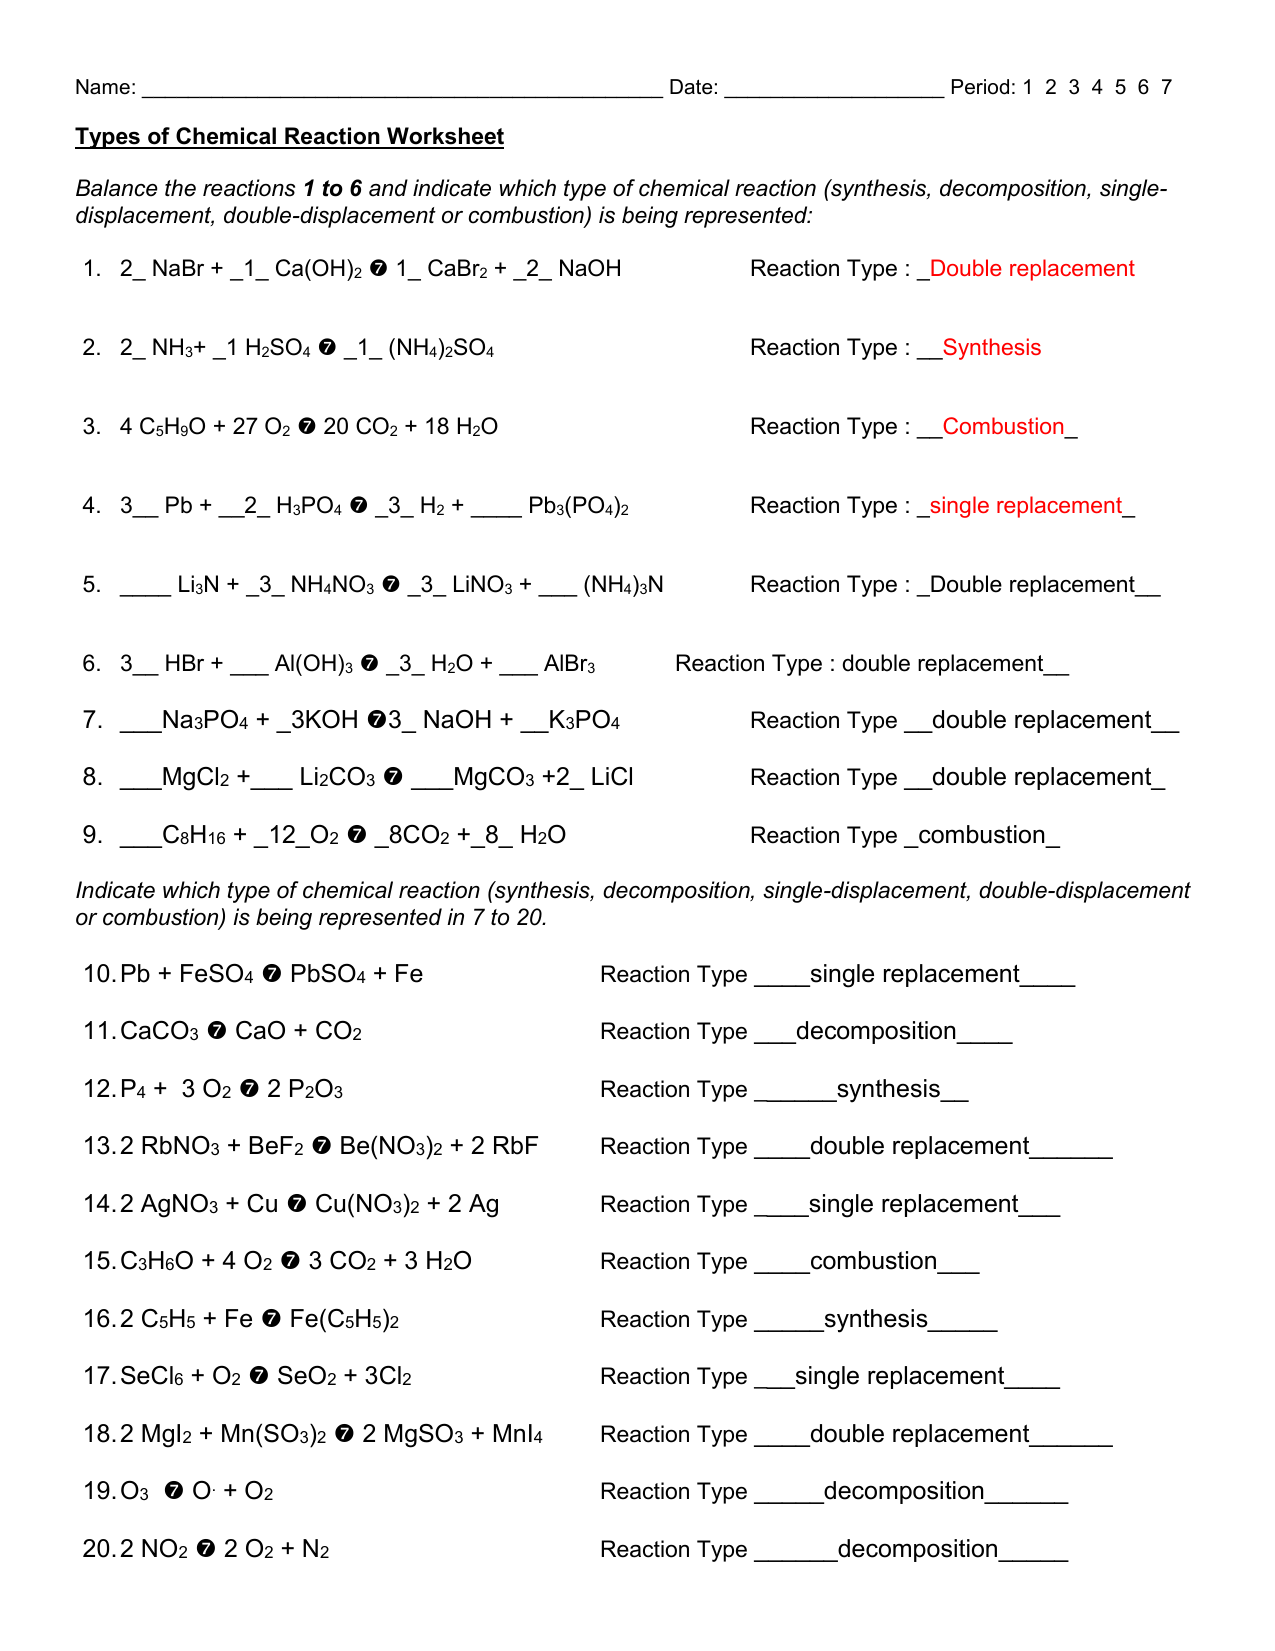 Types of Chemical Reaction Worksheetanswers With Chemical Reactions Types Worksheet